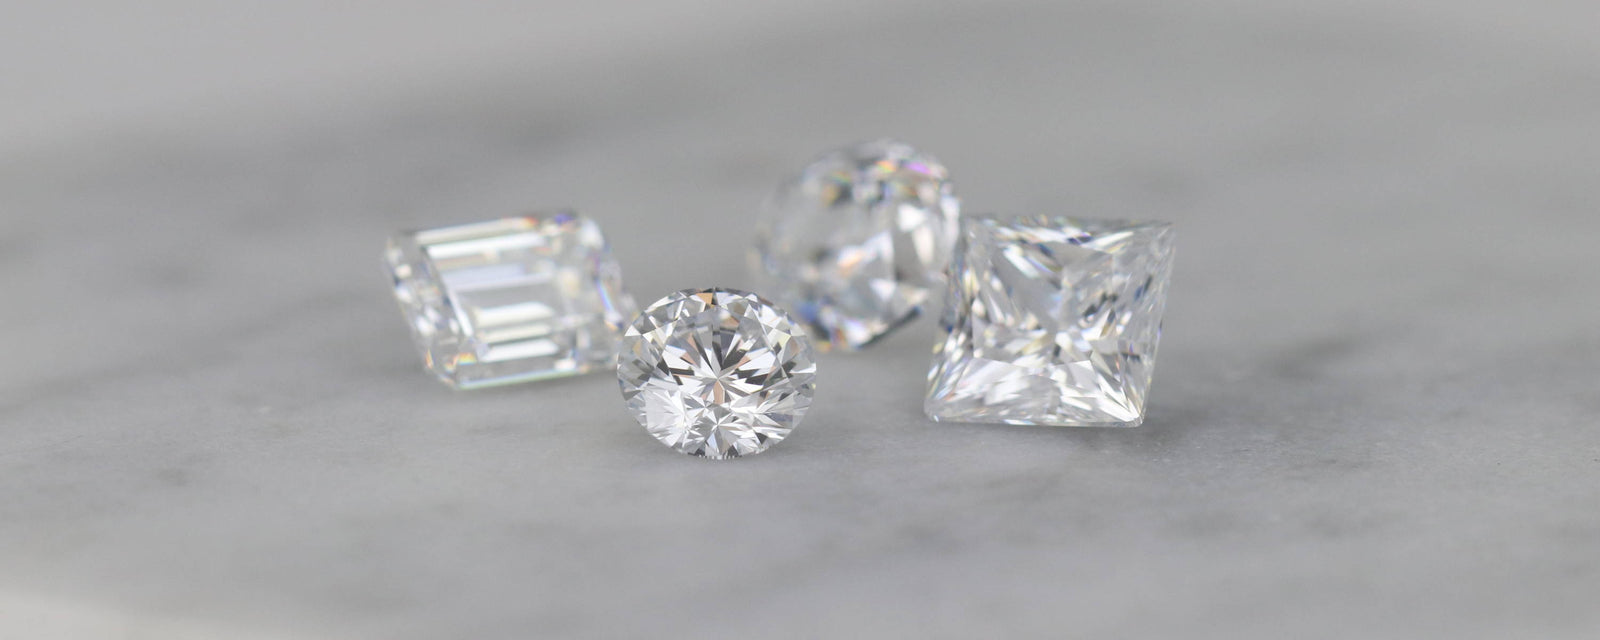 Do Diamonds Hold Value? Top Expert Reasons You Should Know